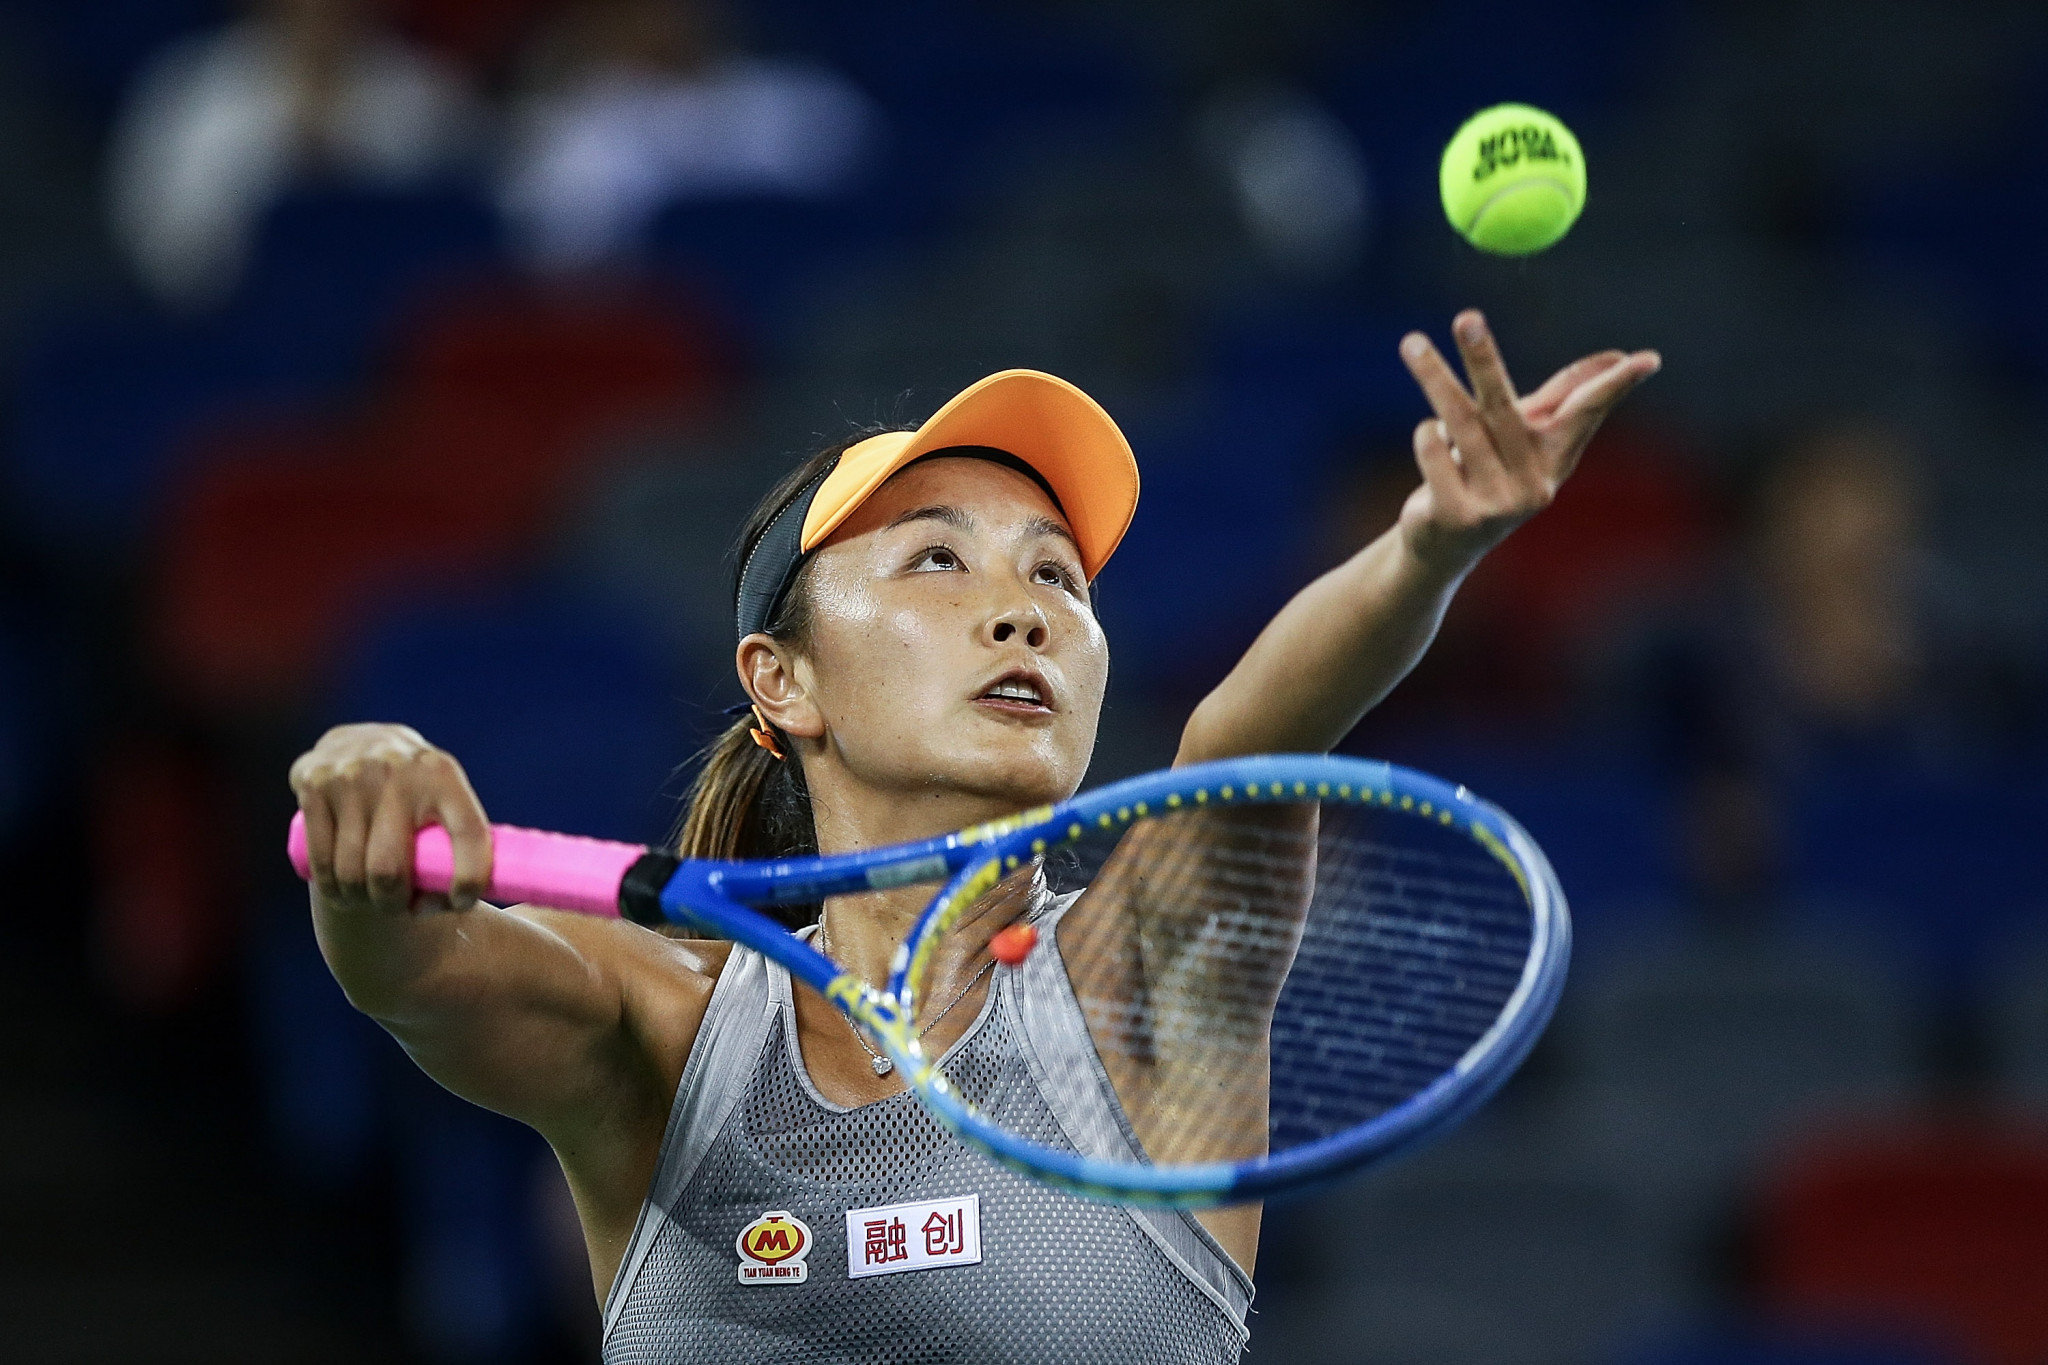 The IOC has confirmed it has held a second video call with Peng Shuai ©Getty Images